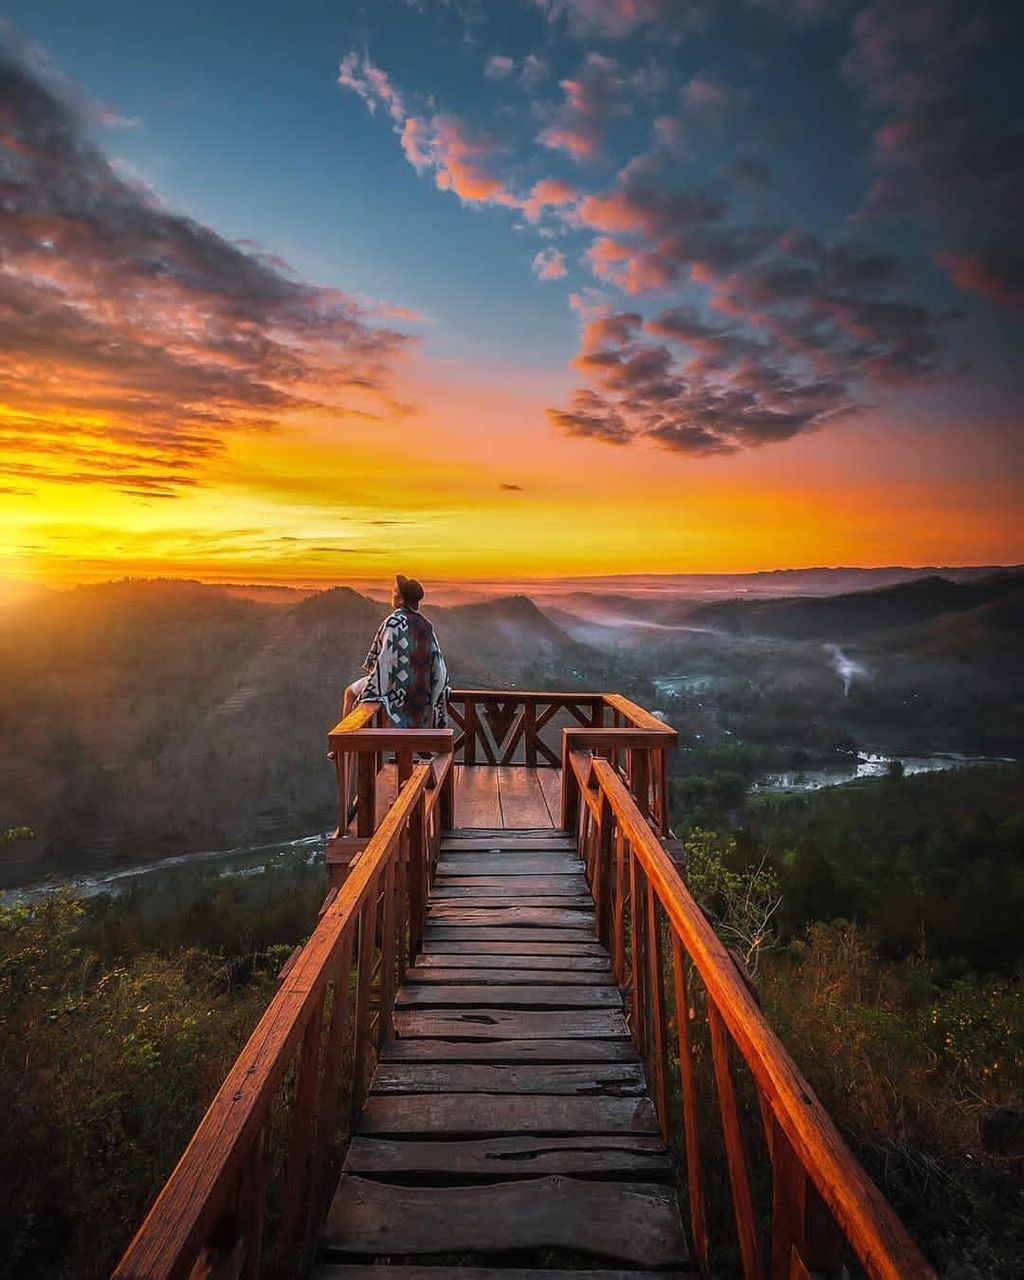 sky, sunset, cloud, nature, scenics - nature, beauty in nature, environment, architecture, landscape, water, horizon, land, travel, travel destinations, evening, sea, sunlight, tranquility, dusk, vacation, built structure, trip, holiday, sun, orange color, the way forward, outdoors, tranquil scene, mountain, wood, tourism, bridge, activity, adult, coast, railing, dramatic sky, one person, men, idyllic, beach, footpath, leisure activity, non-urban scene, reflection, transportation, pier, twilight, relaxation